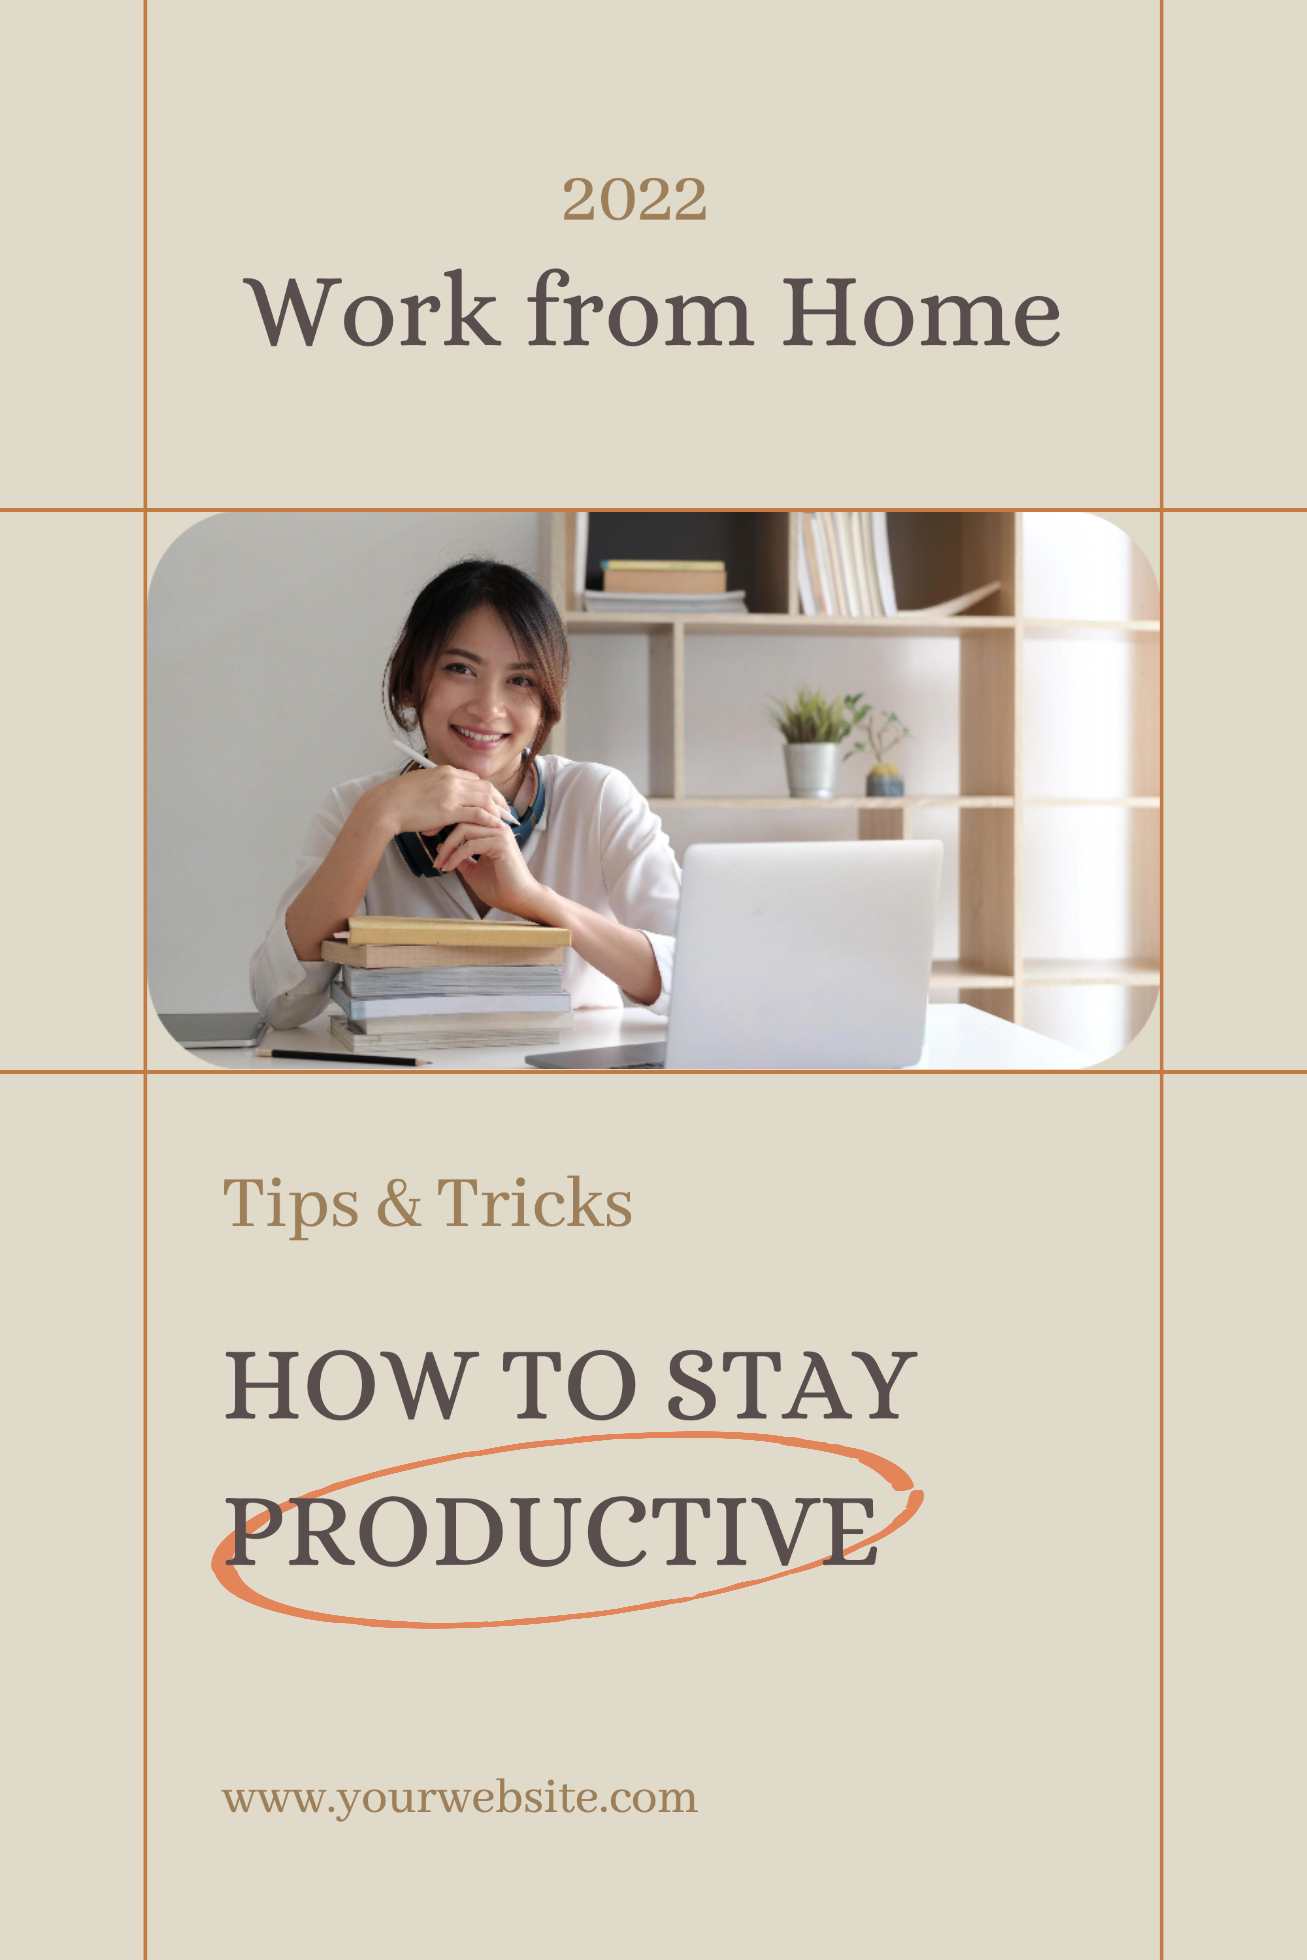 Beige Minimalist How to Stay Productive Pinterest template